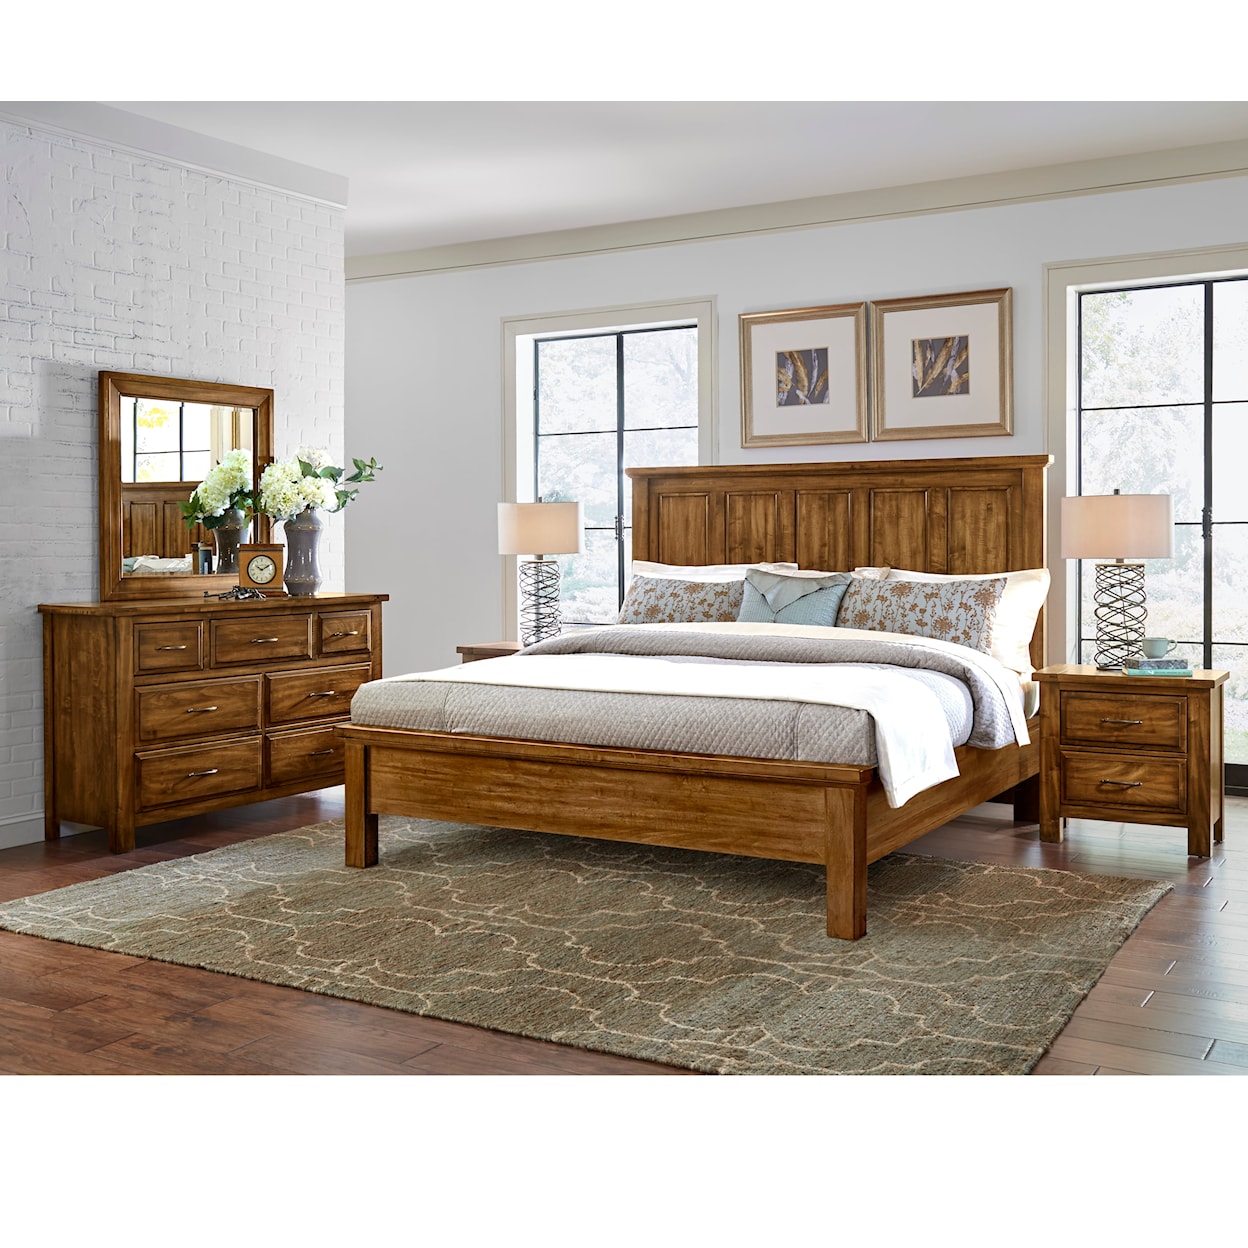 Artisan & Post Summit Road Queen Mansion Bed